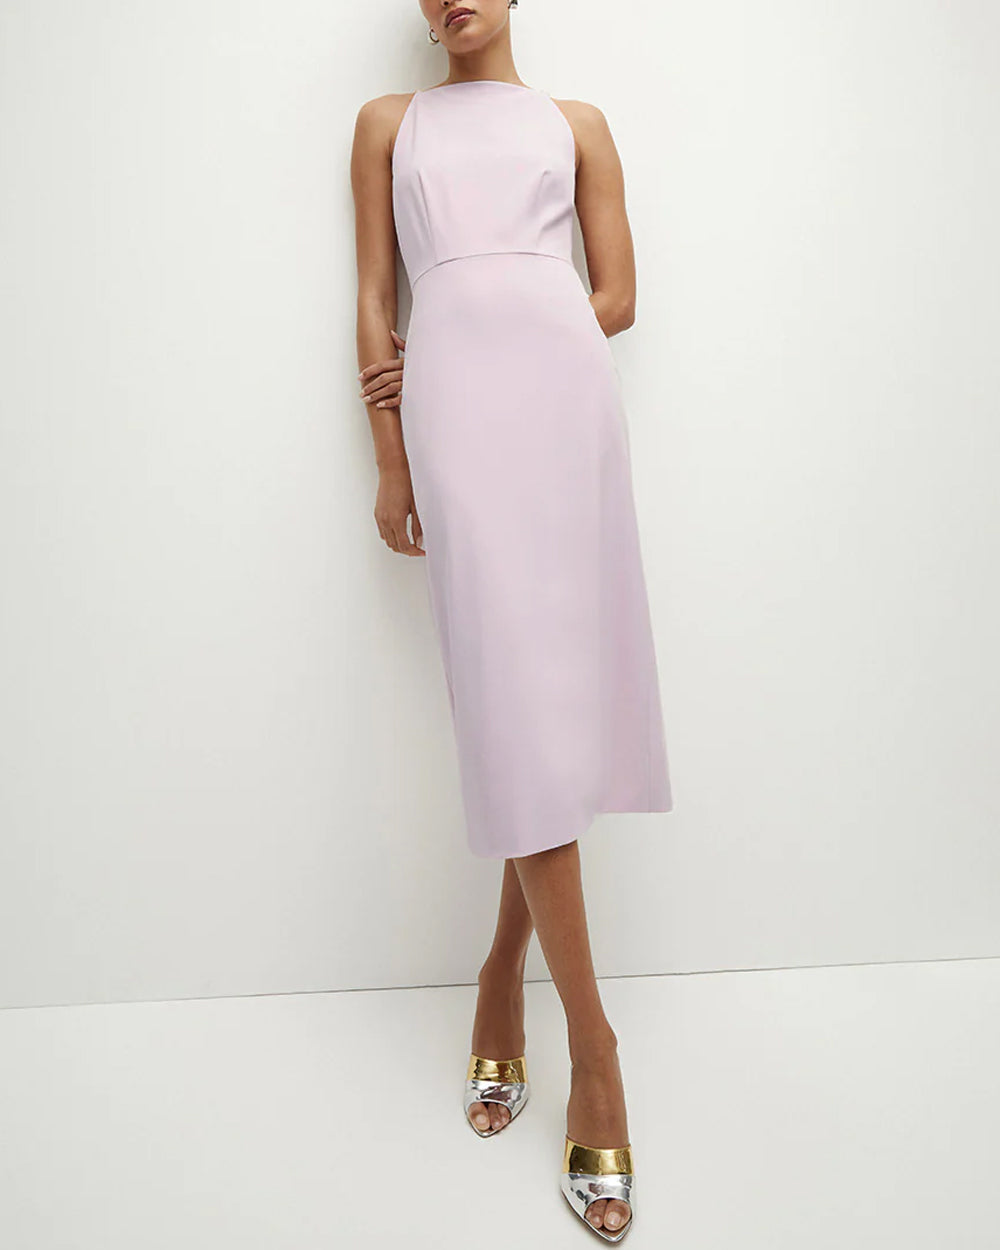 Barely Orchid Reese Dress